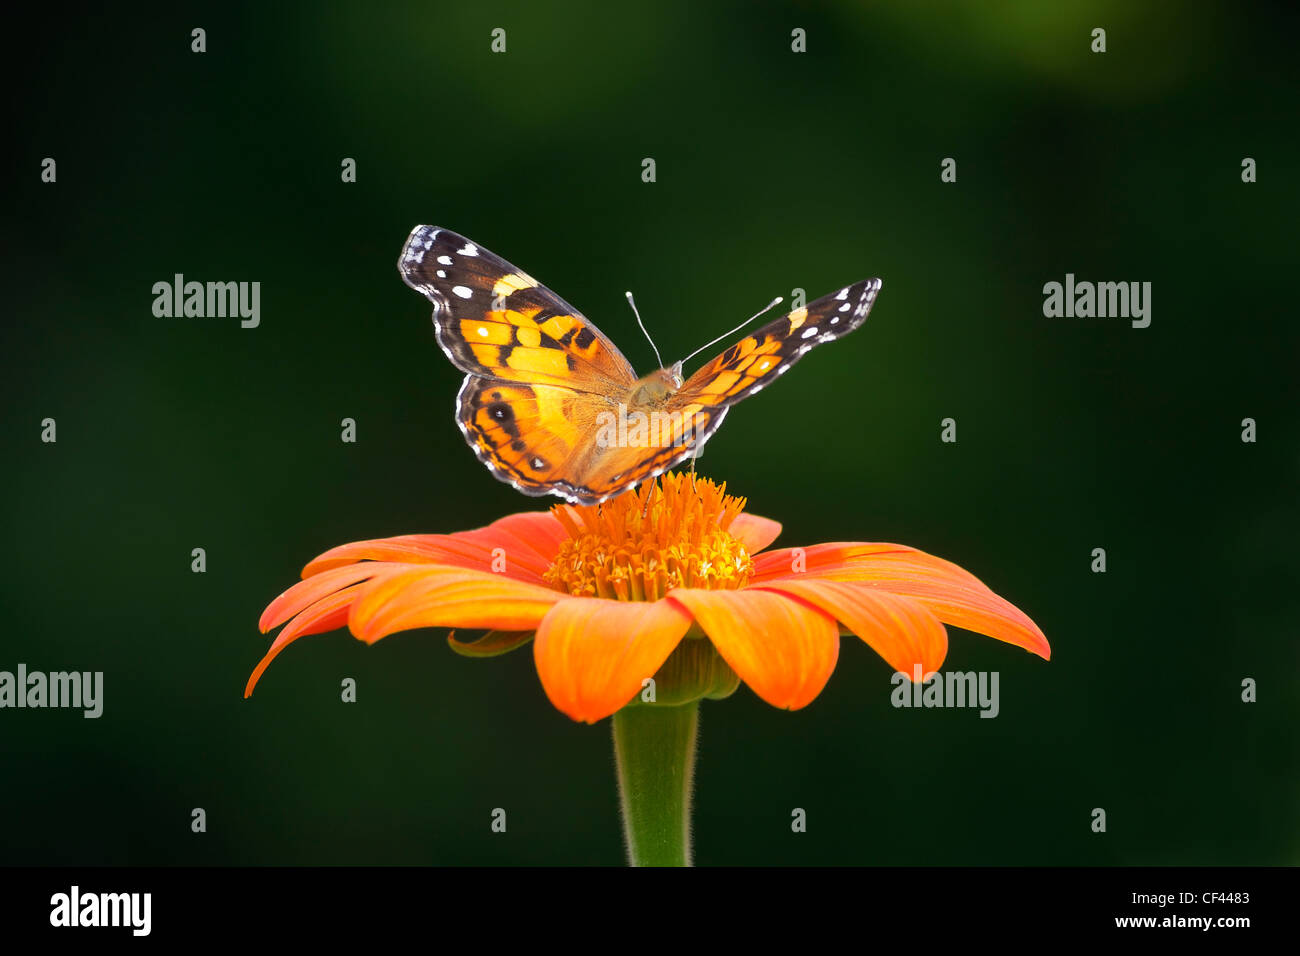 An American Lady butterfly (Vanessa virginiensis) perched on a Mexican Sunflower. Stock Photo